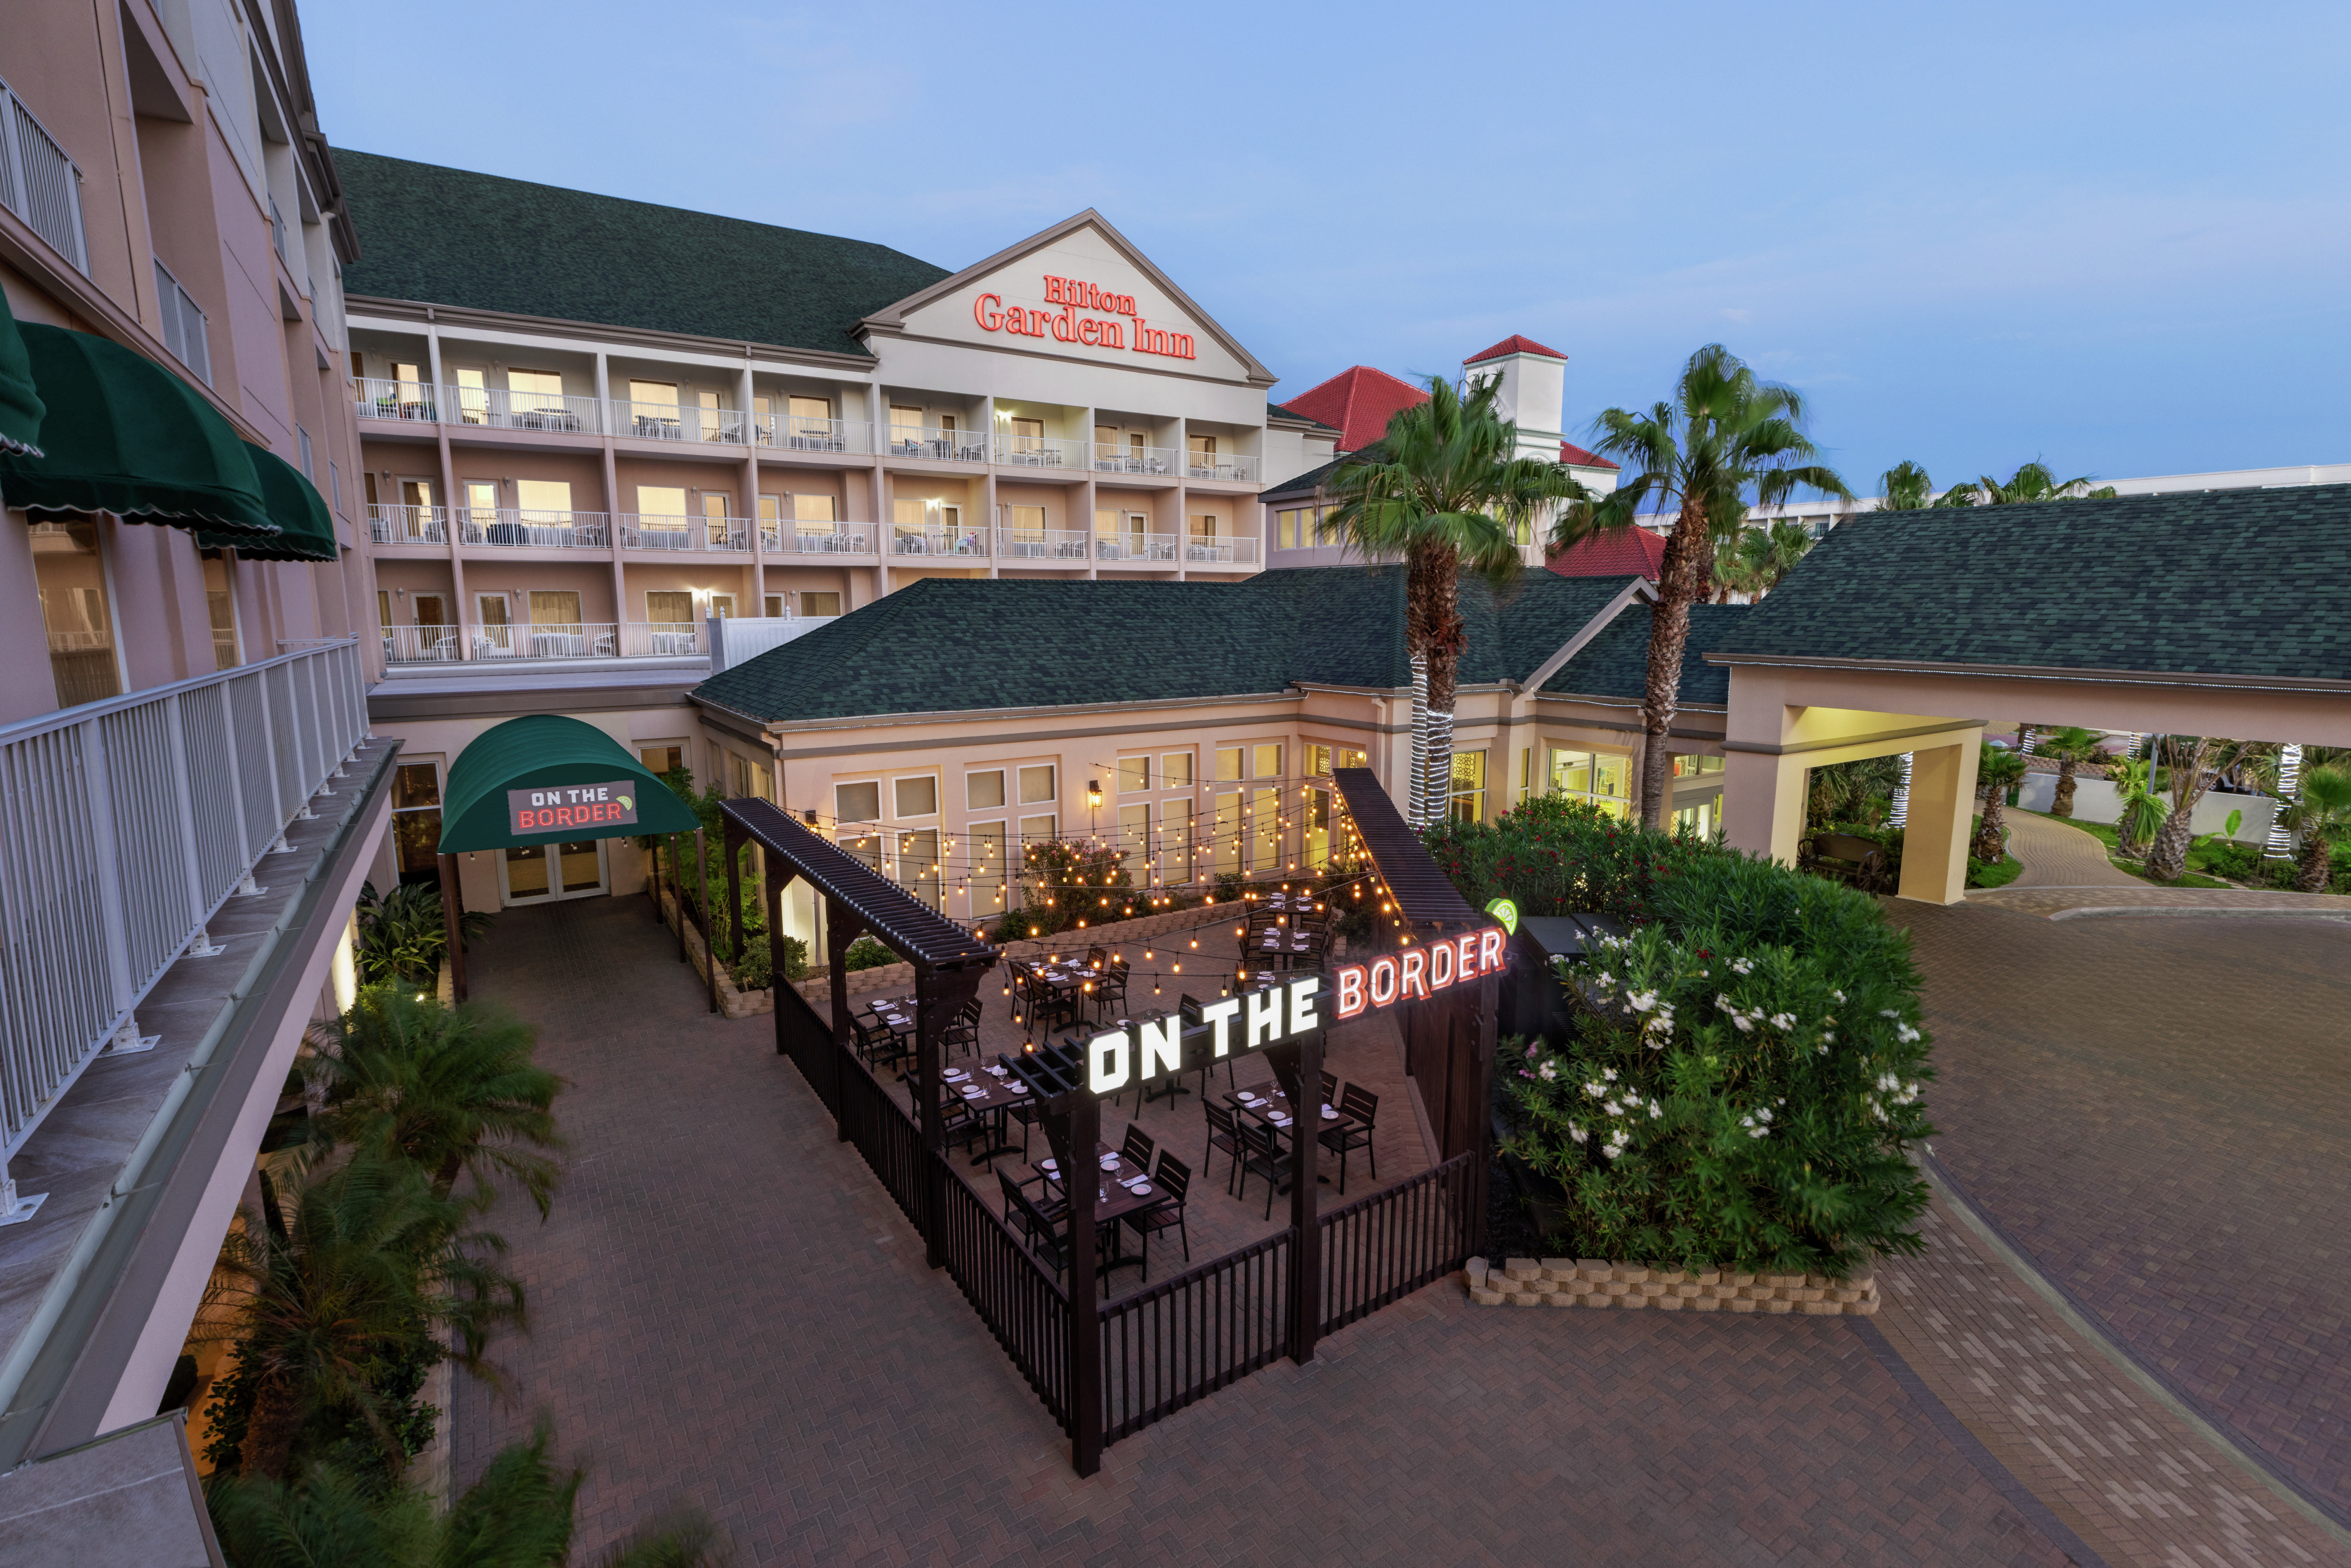 On-site restaurant with outdoor patio serving delicious food and beverages.